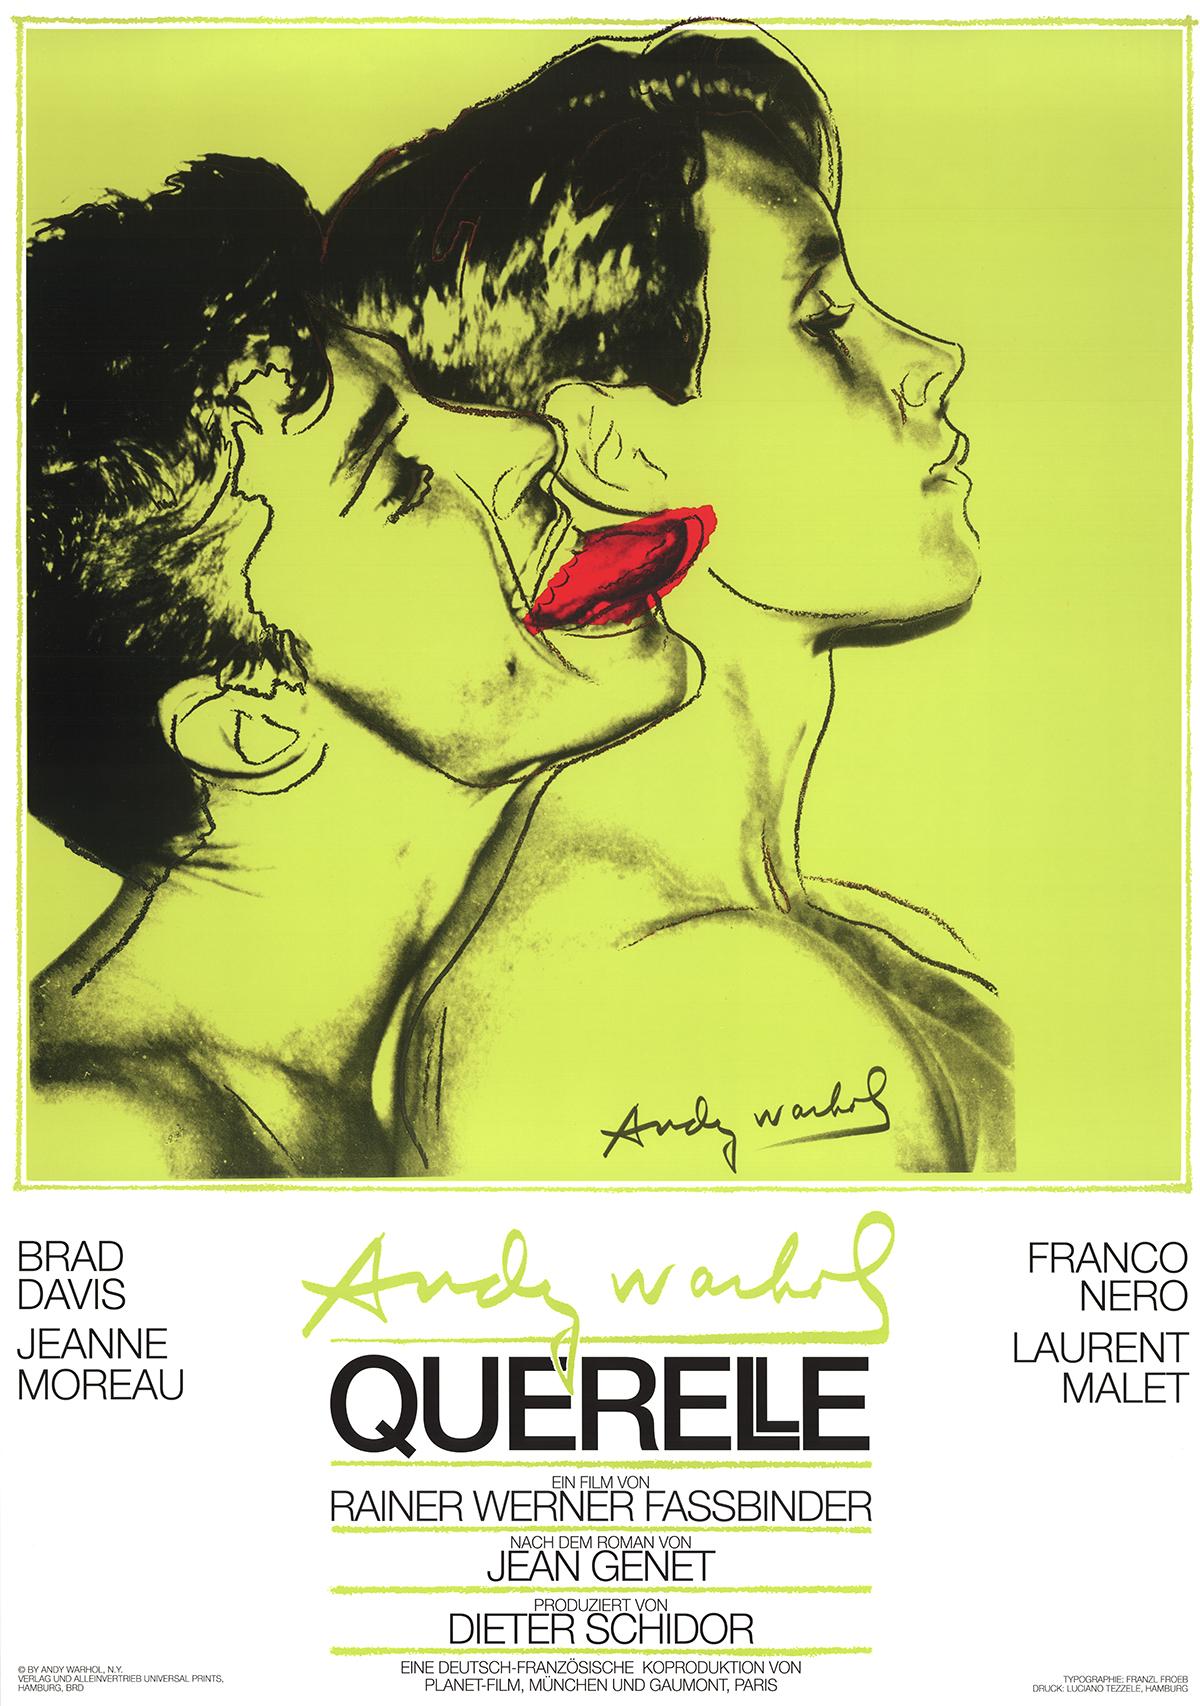 Andy Warhol-Querelle Green-39" x 27.5"-Poster-1983-Pop Art-Green-film, movie - Print by (after) Andy Warhol